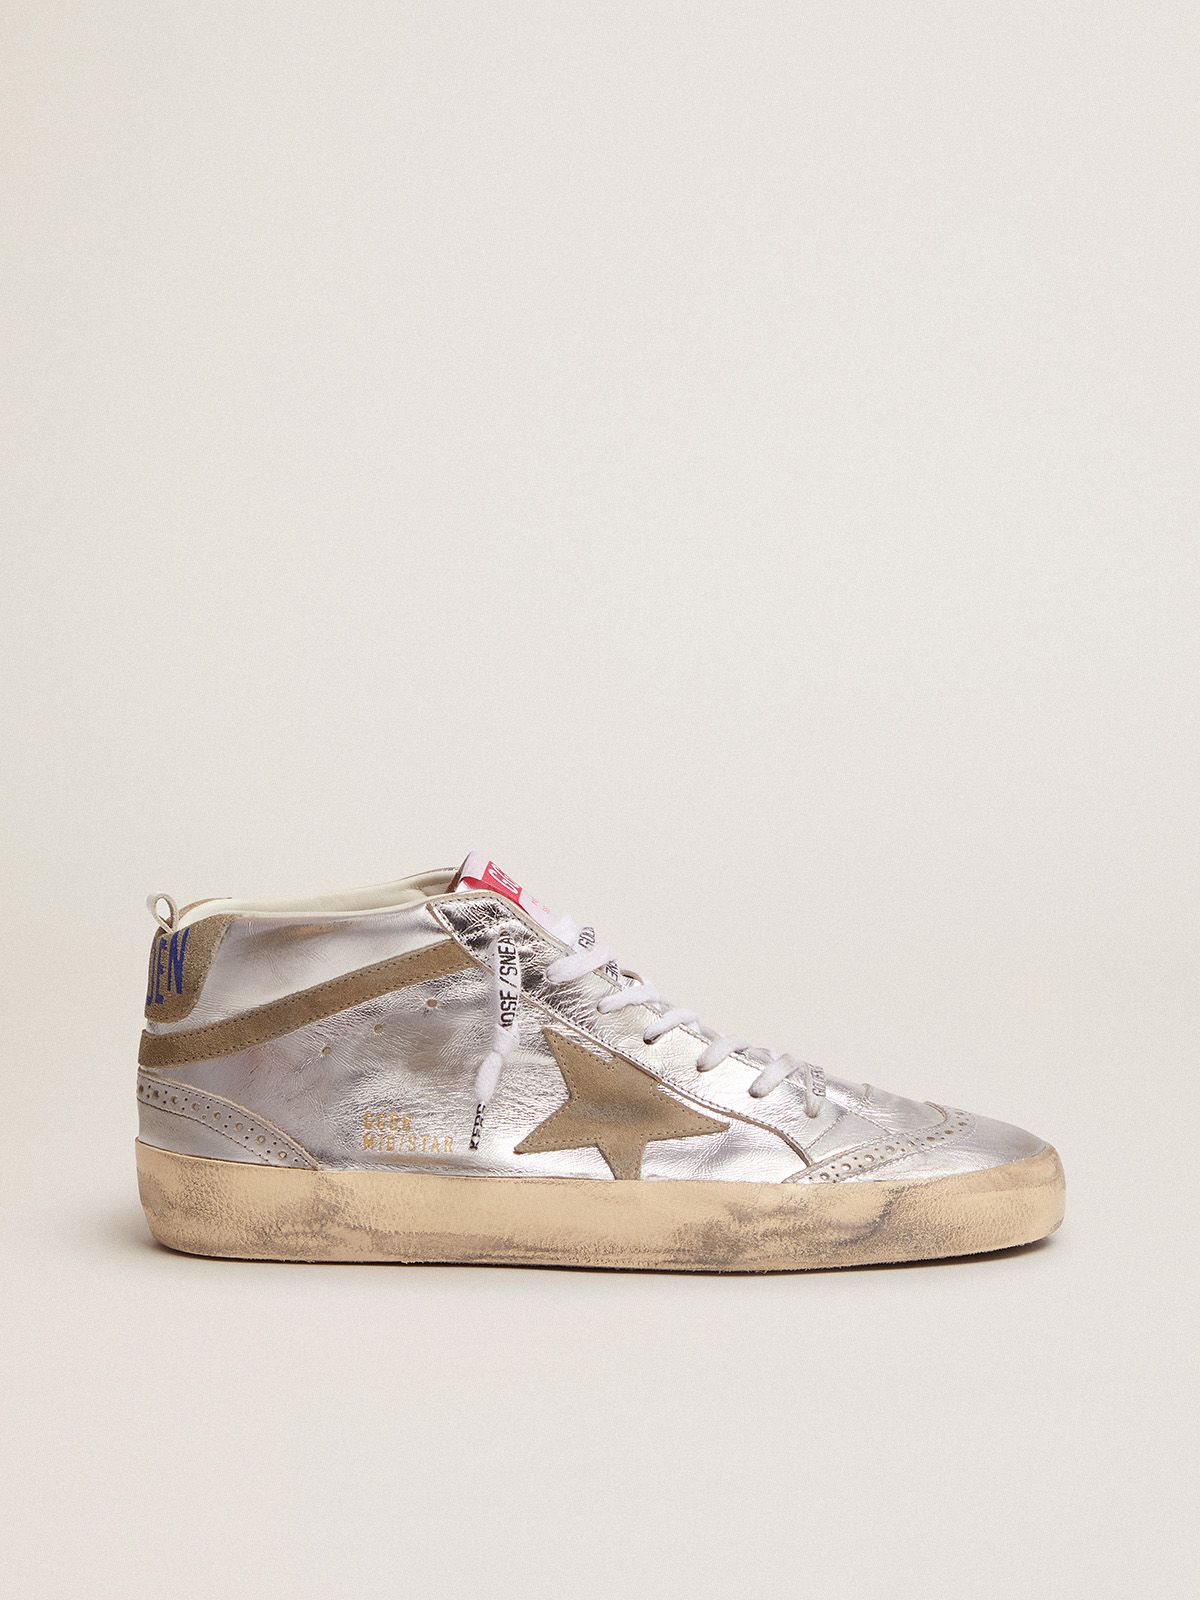 golden goose sneakers suede metallic star in Star leather with silver Mid flash dove-gray and